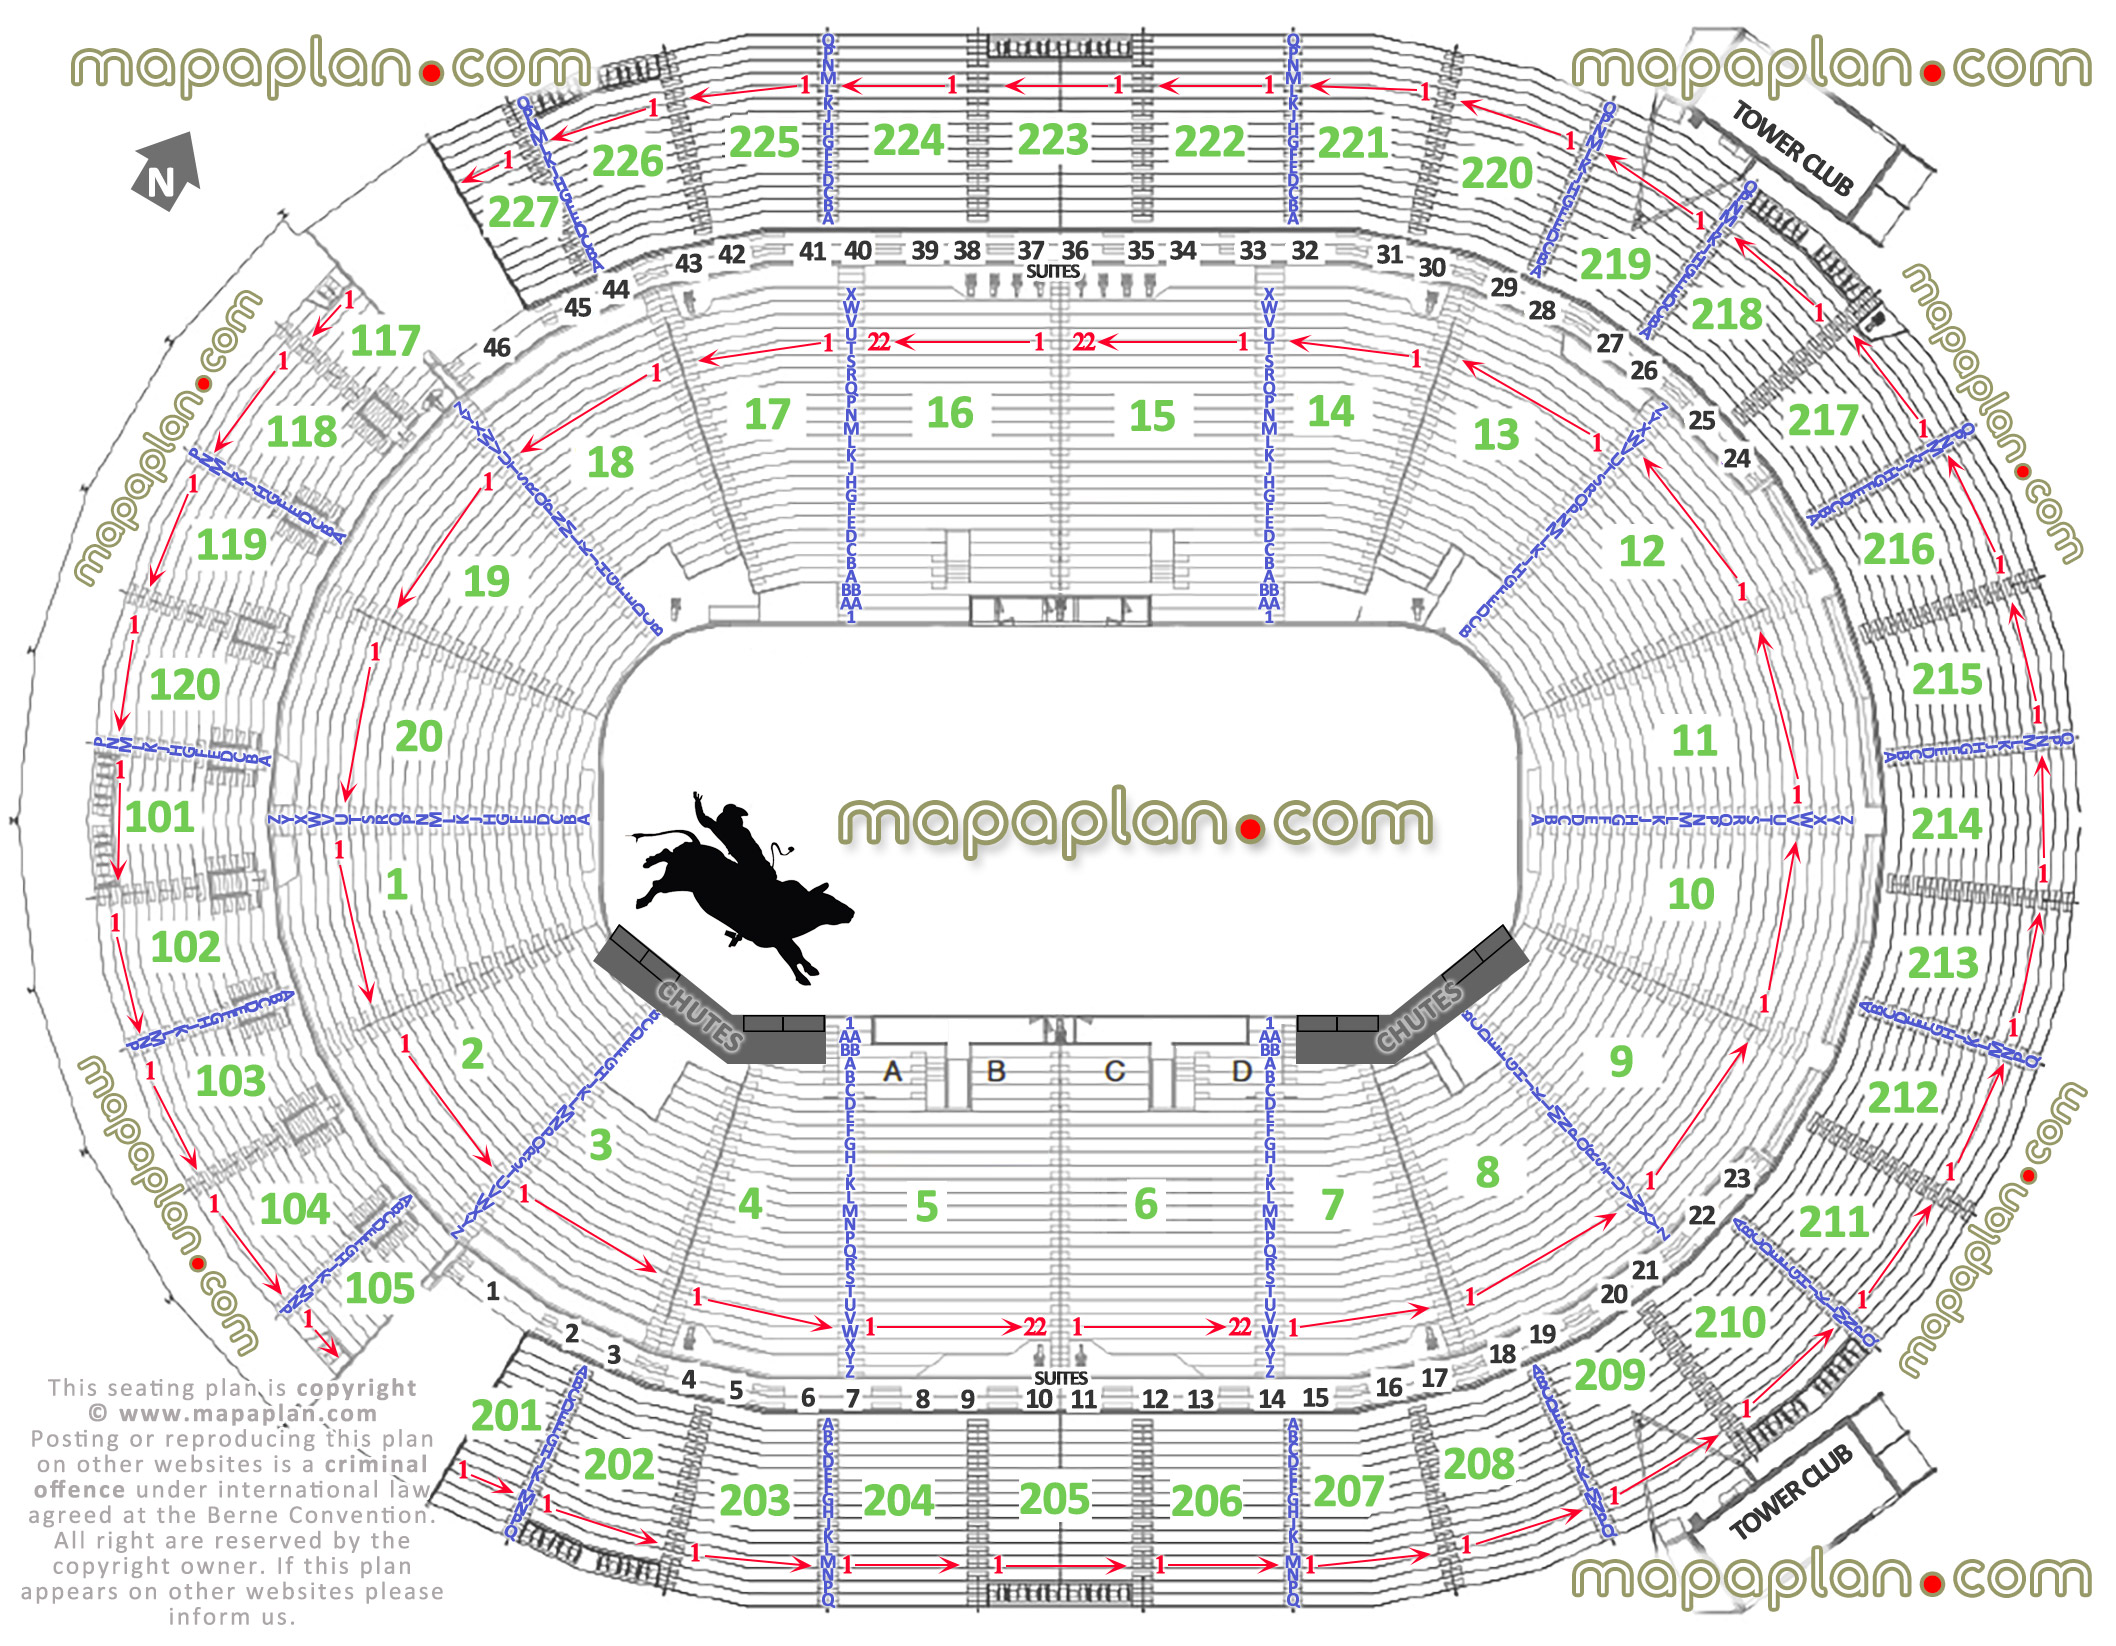 pbr rodeo show professional bull riders seating diagram individual find seat locator seats row best seats rows numbered lower premium executive suite upper bowl level sections 101 102 103 104 105 117 118 119 120 Las Vegas T-Mobile Arena Las Vegas T-Mobile Arena seating chart